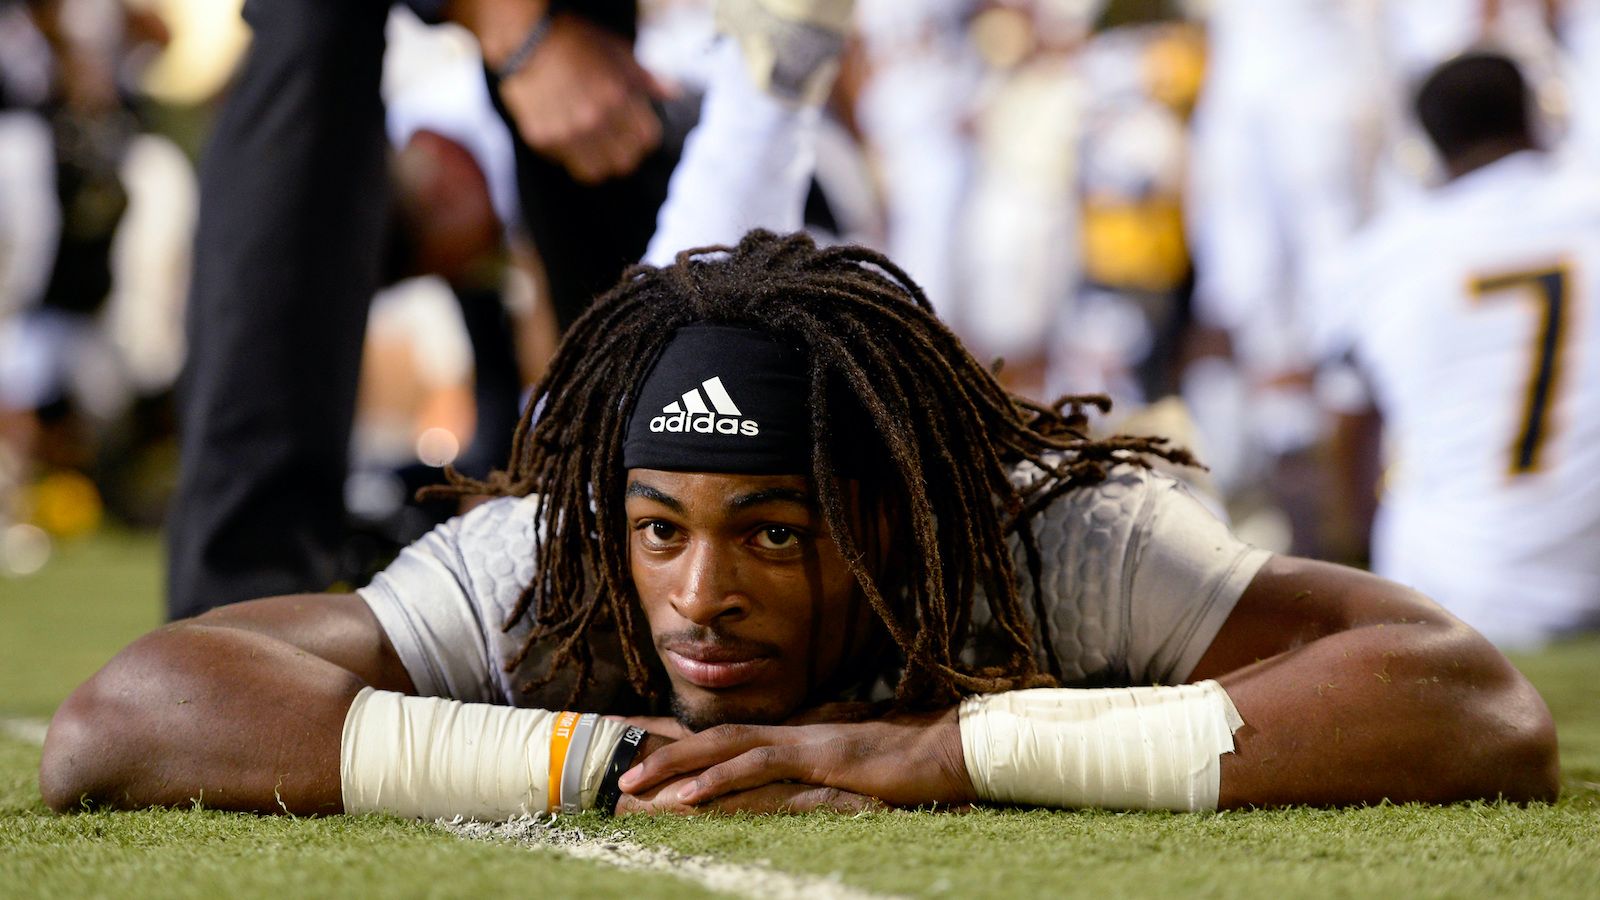 Breaking away Najee Harris escaped troubled past with desire and lots